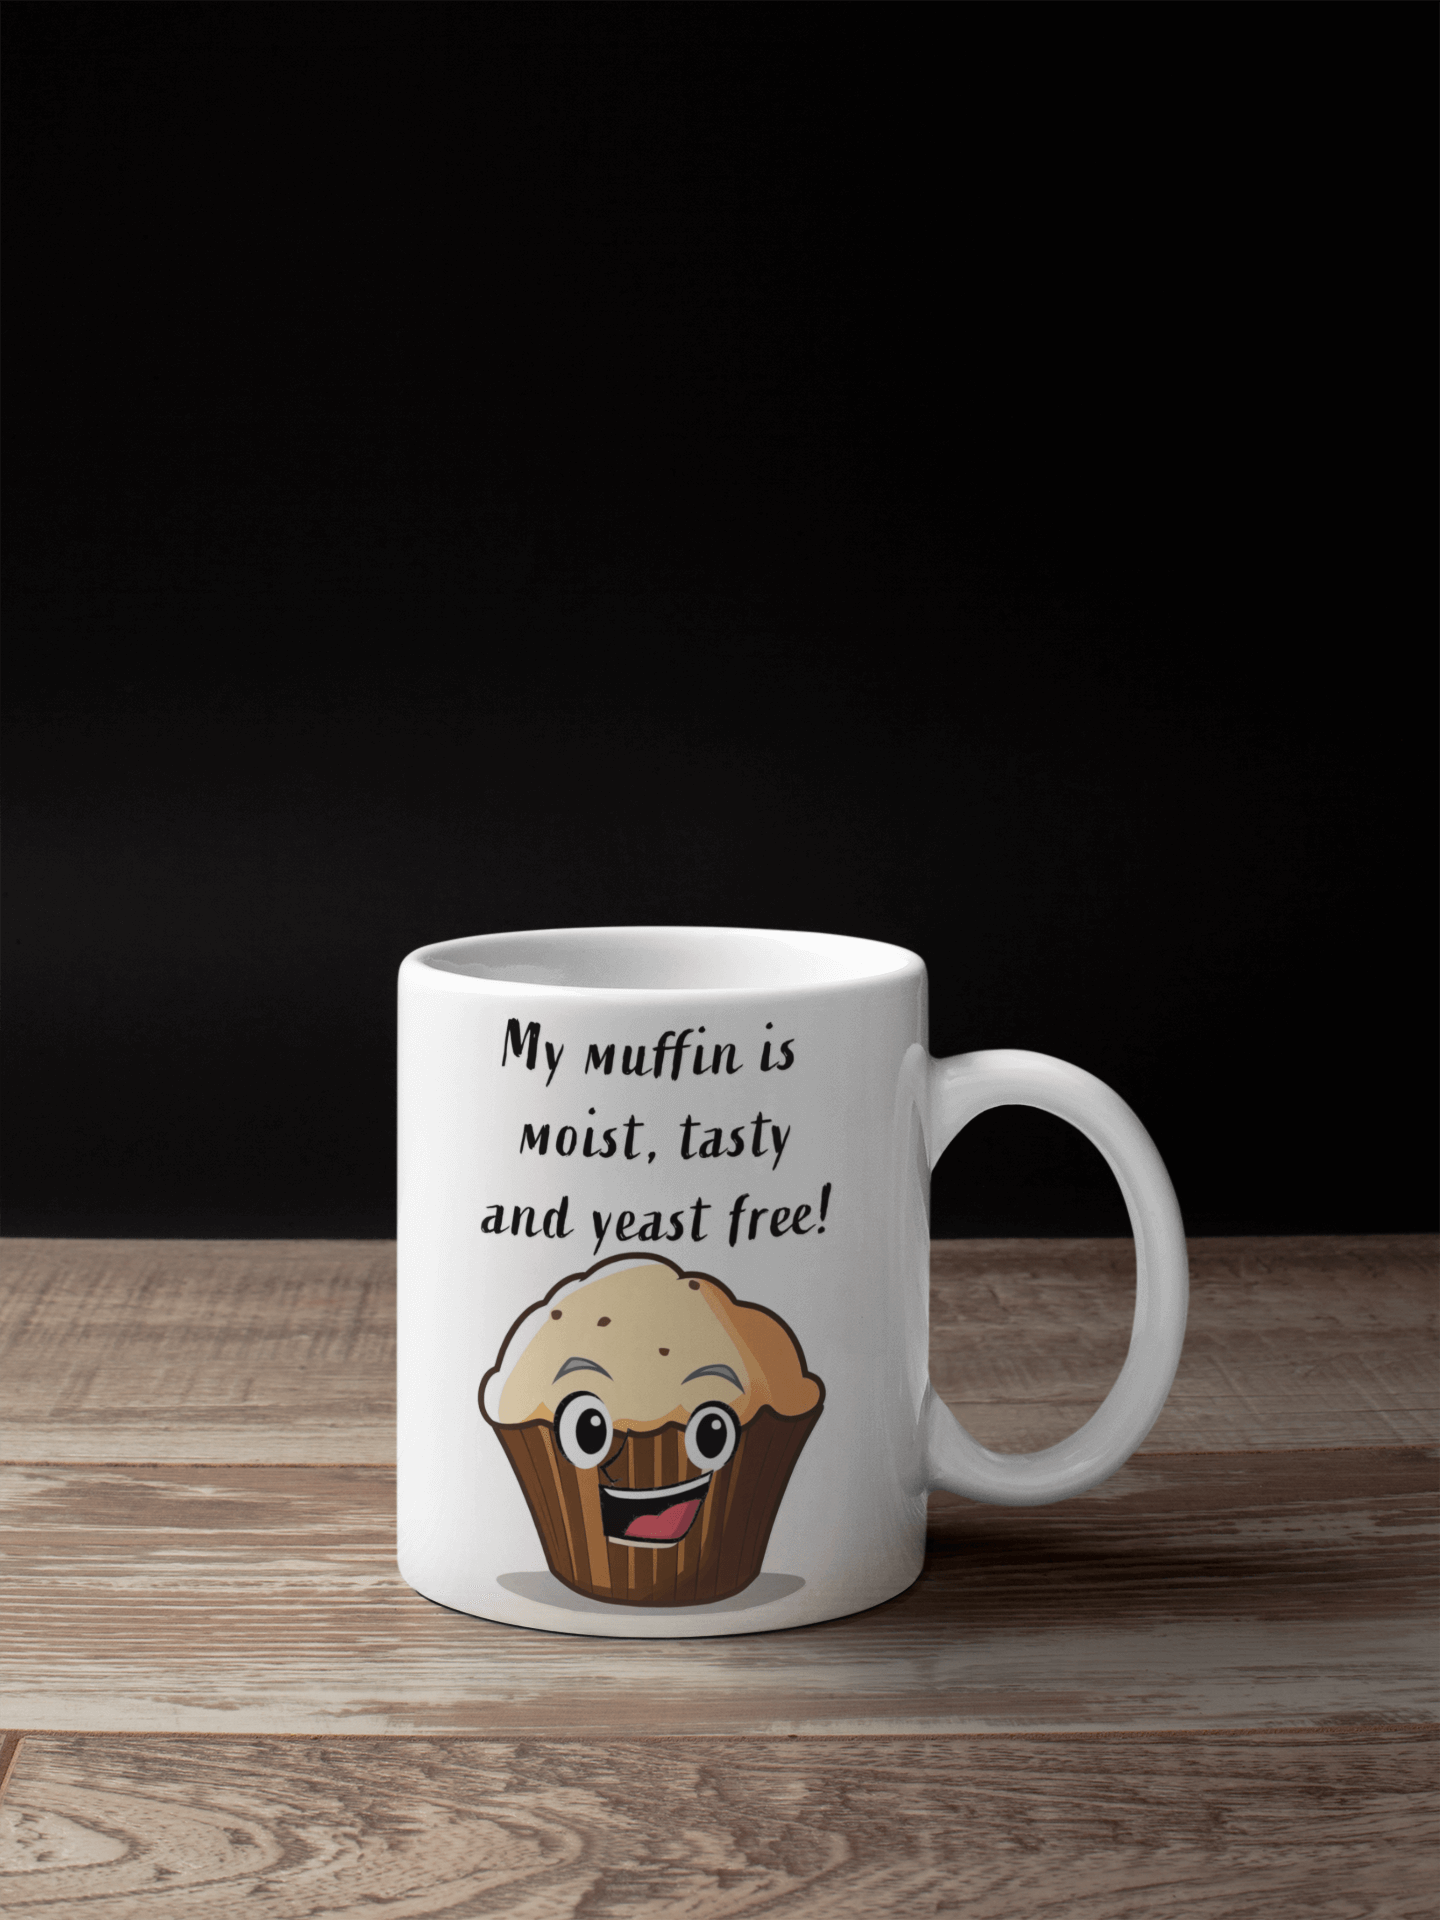 My muffin is moist tasty and yeast free- White glossy mug - Funny, office decor, handmade gift, gift idea, mothers day, muffin, good eats